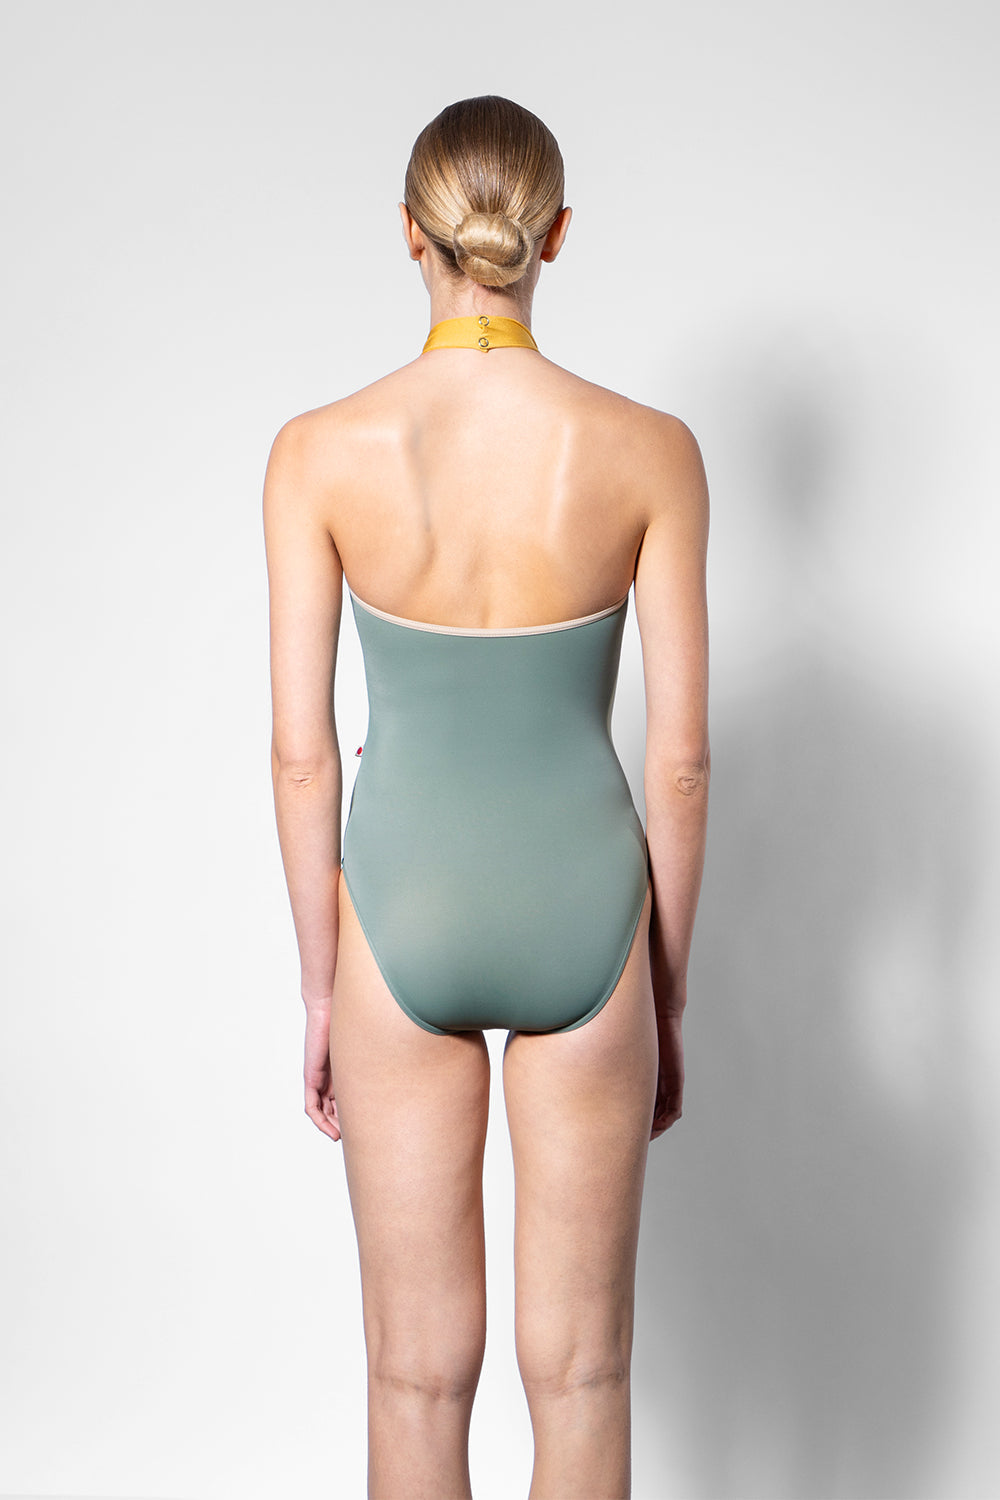 Sarah leotard in N-Sage body color with T-Mosaic trim color and N-Glow collar color